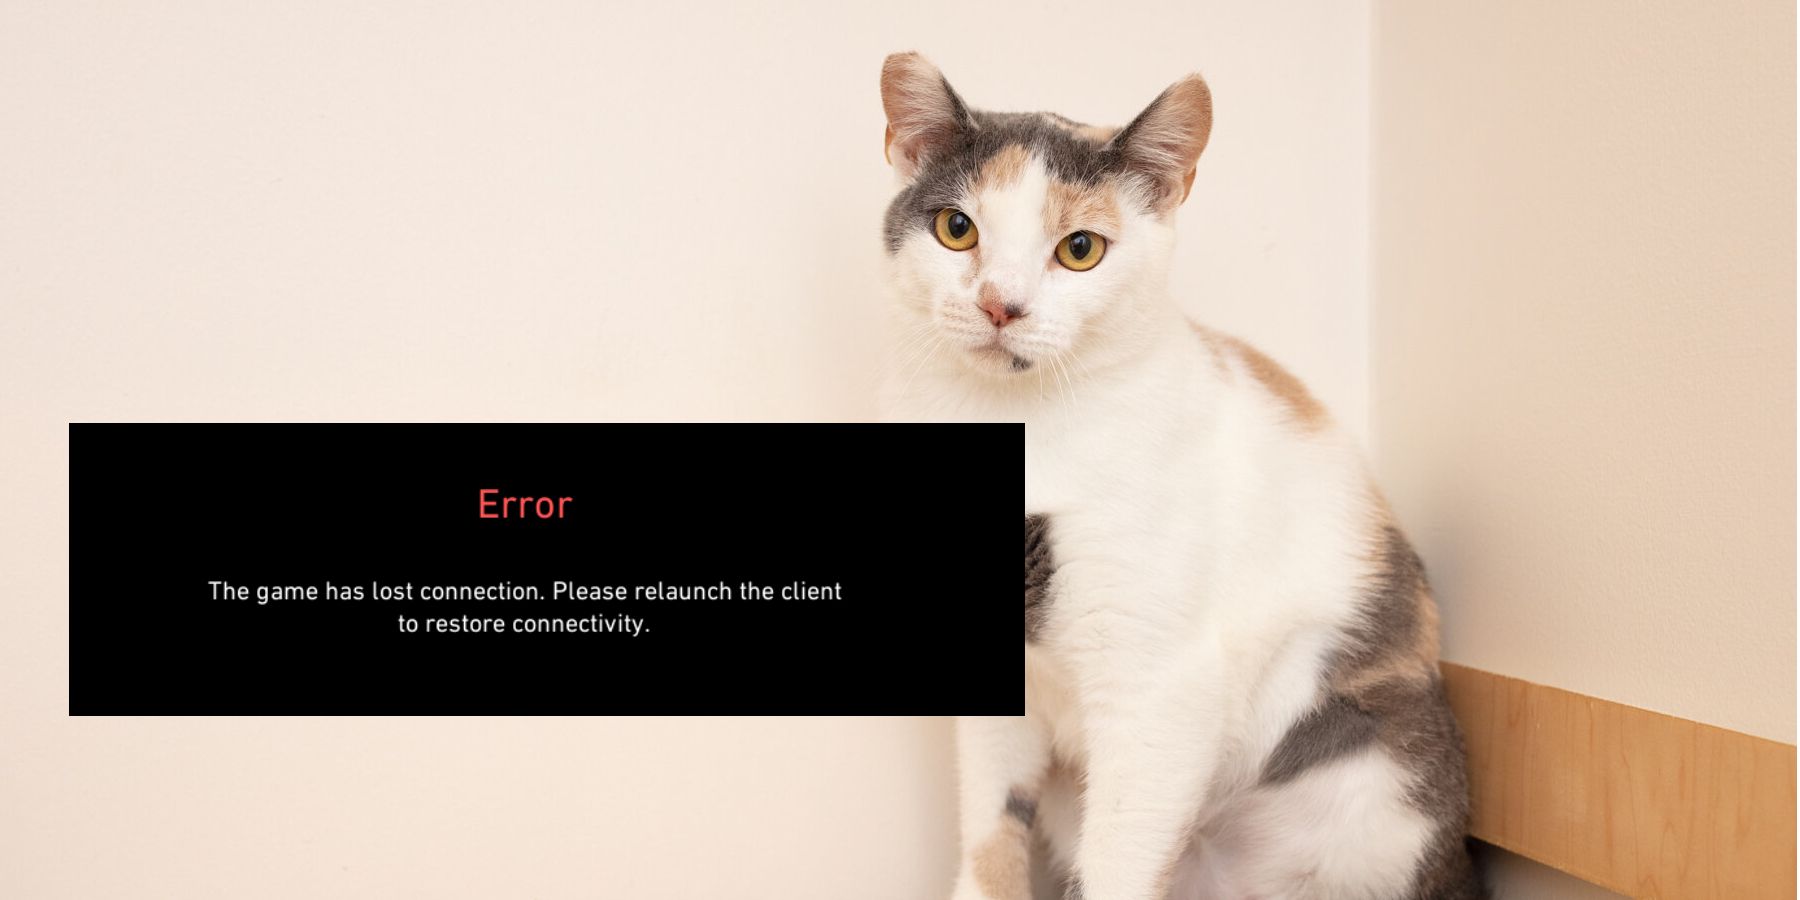 calico-cat-sitting-in-corner-lost-connection-error-message